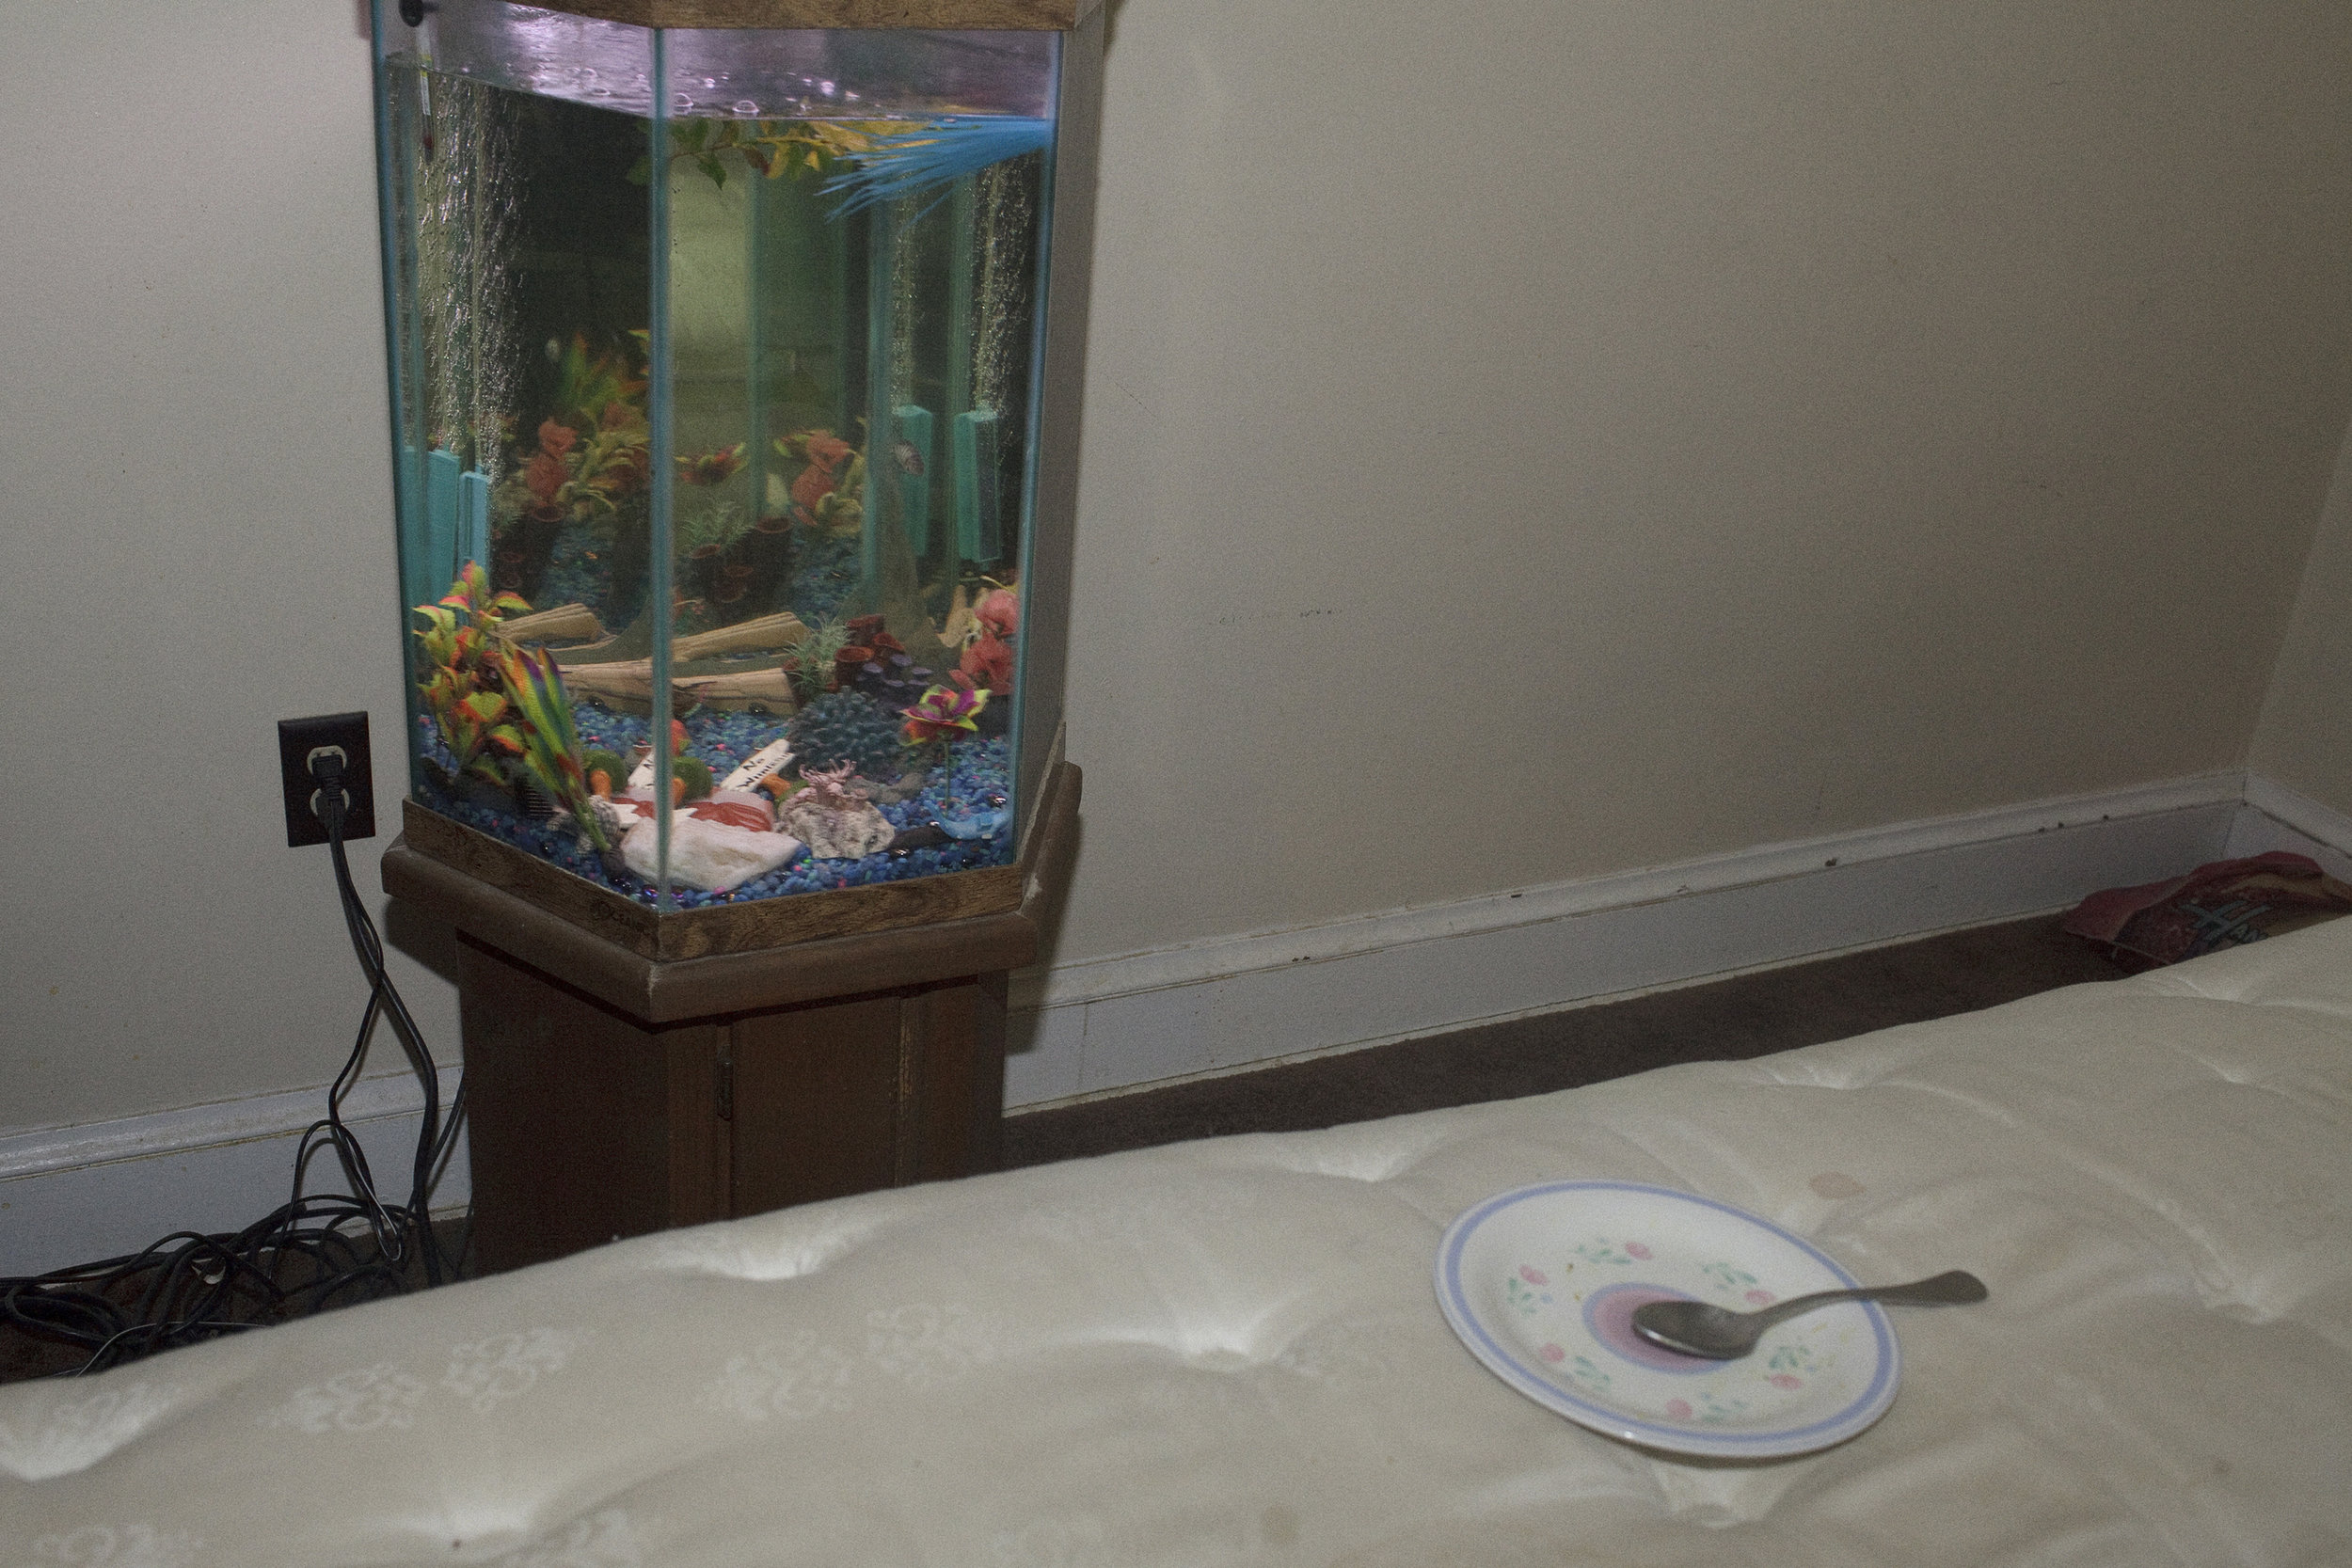  "Bones" breeds fish in his apartment to sell to pet stores. His connection to the river is intertwined with his love of all things outdoor. A true urban outdoorsman, he fishes, hunts, breeds fish, and even has a turtle. December, 2012 